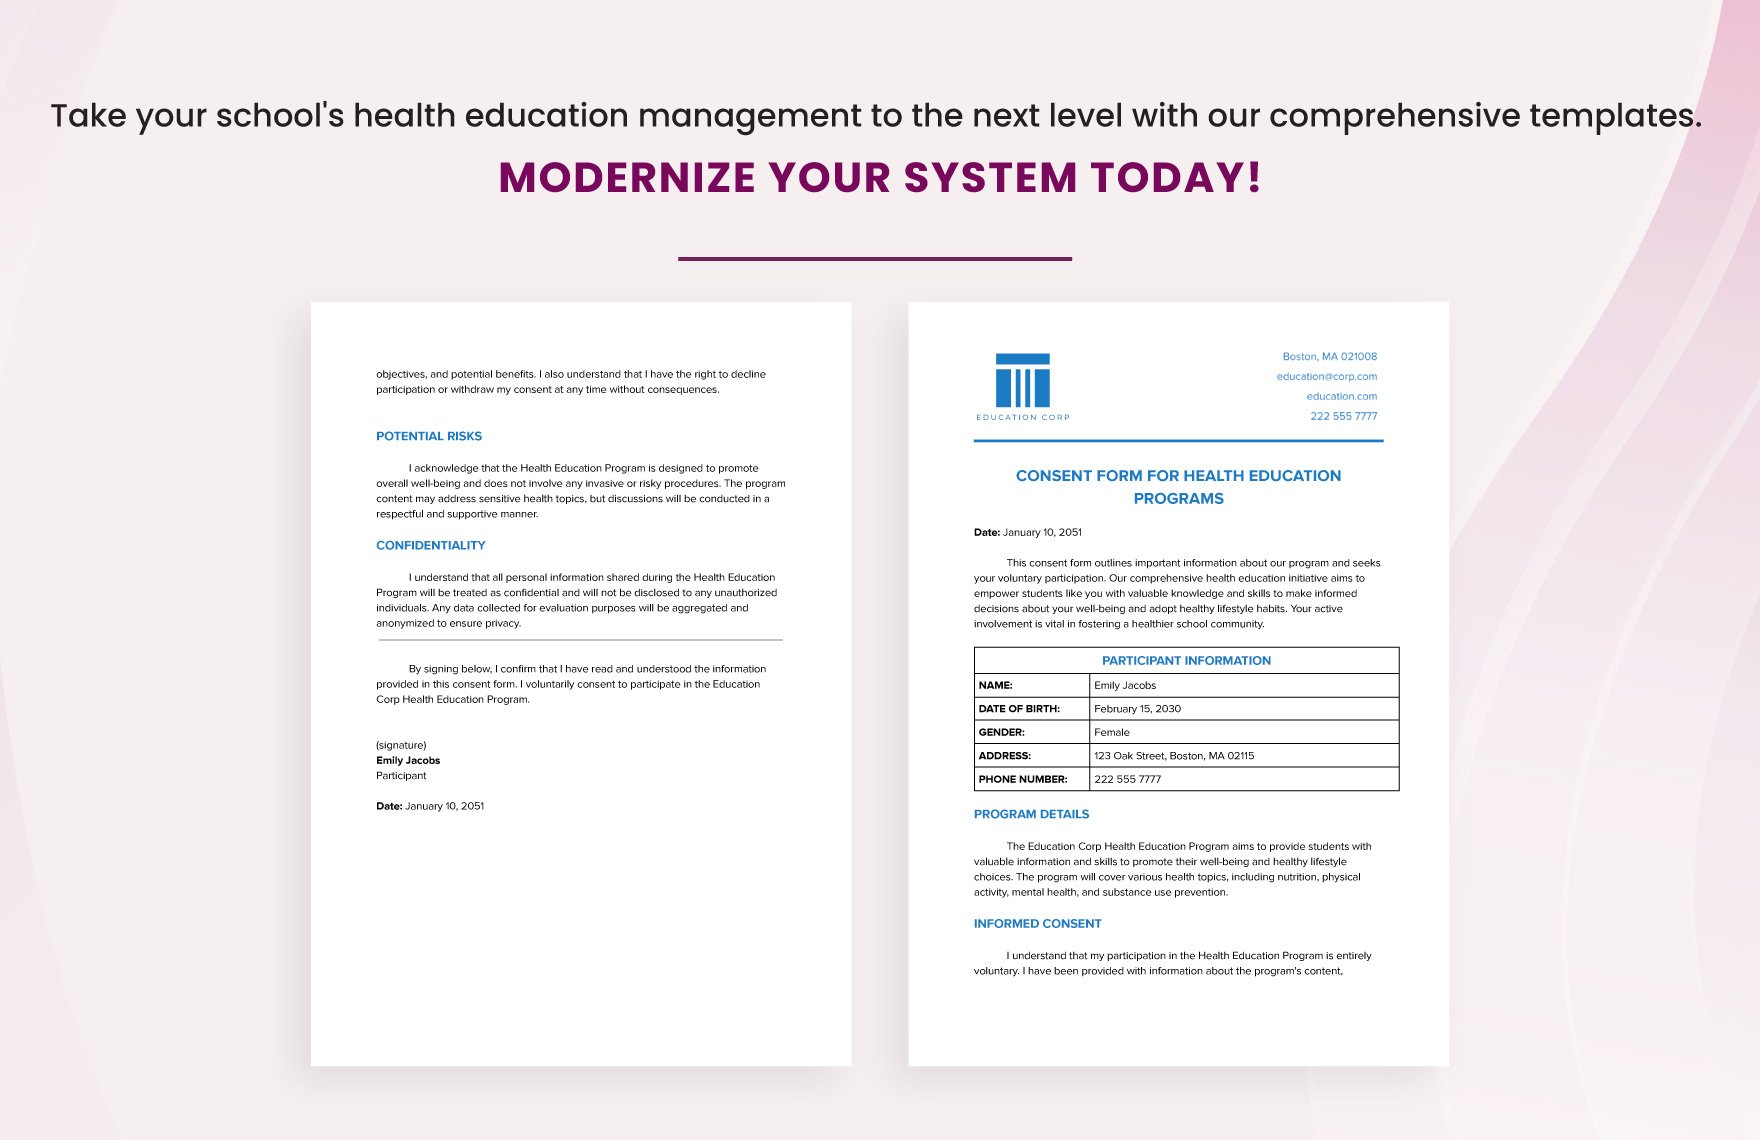 Consent Form for Health Education Programs Template